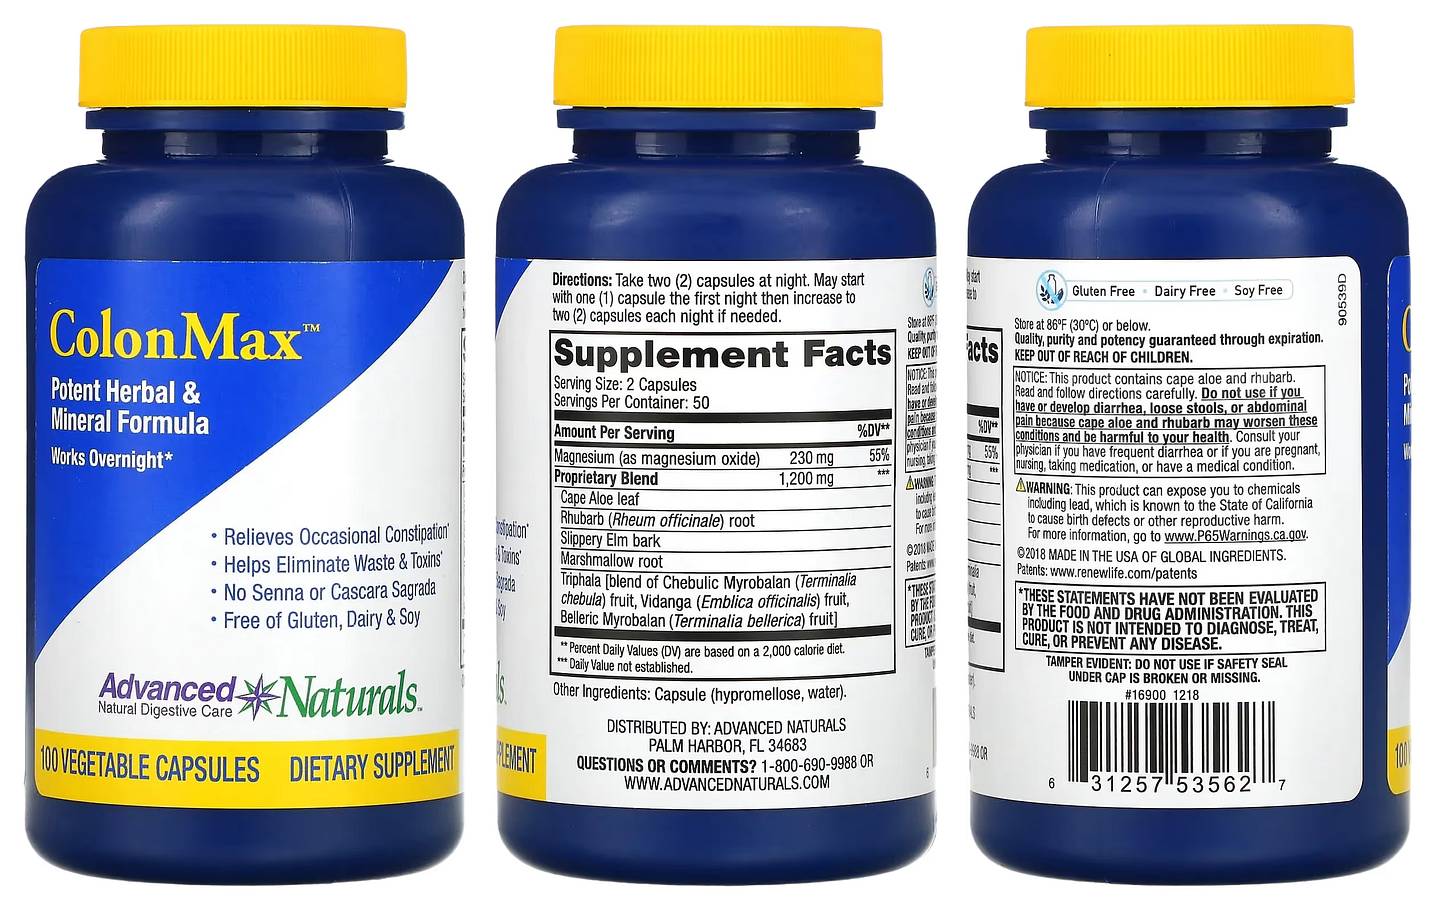 Advanced Naturals, ColonMax, Potent Herbal & Mineral Formula packaging